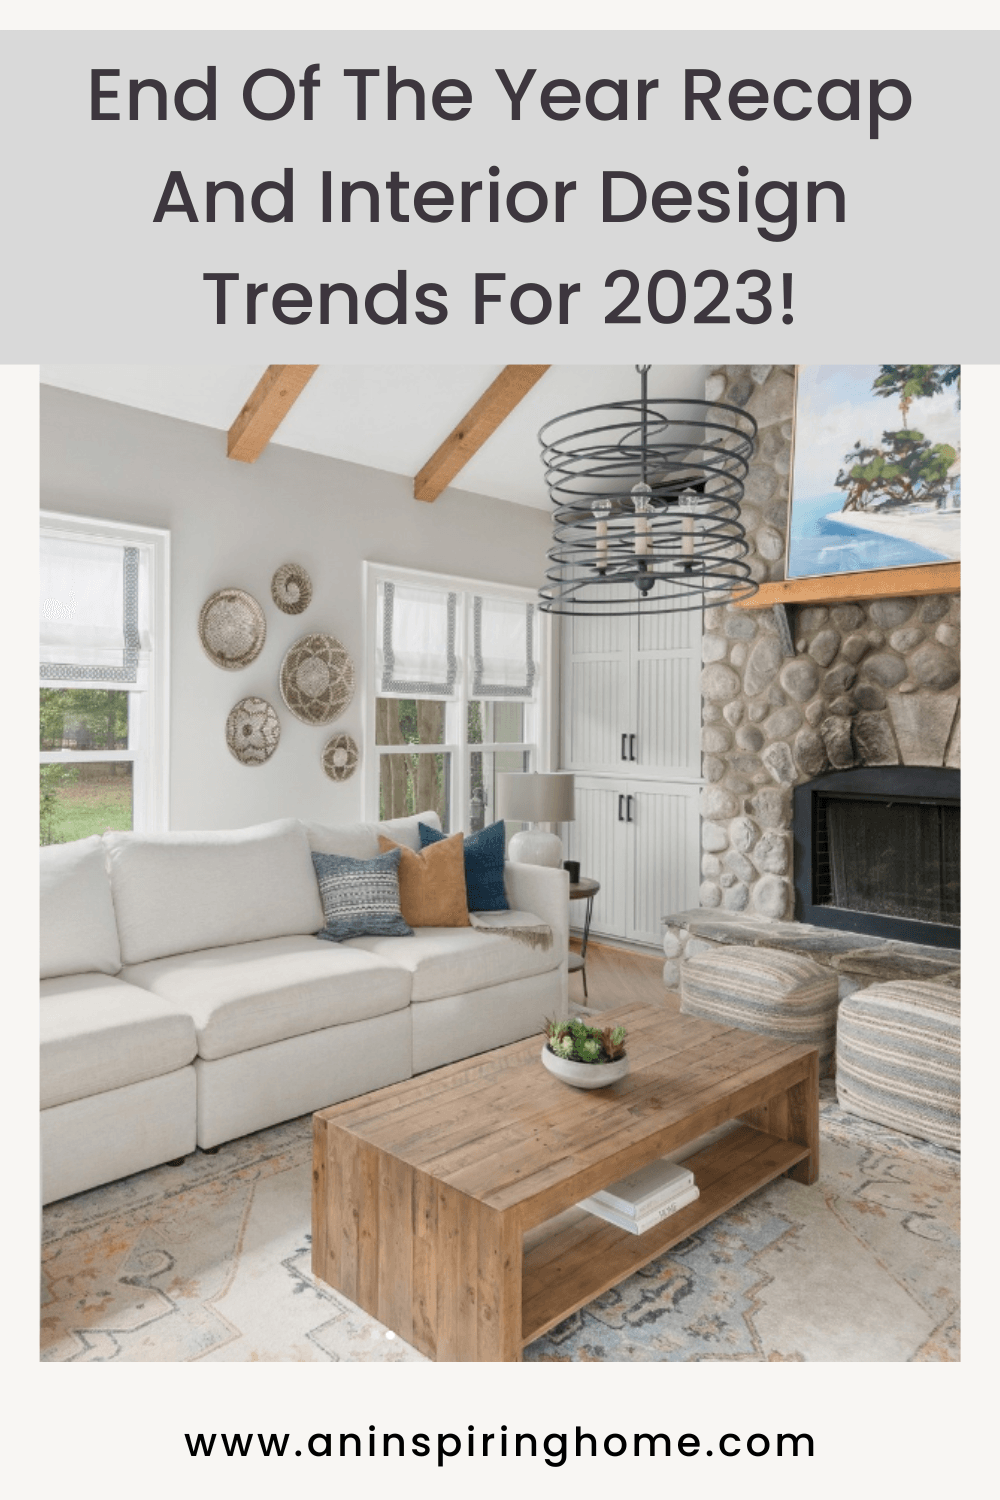 End Of The Year Recap And Interior Design Trends For 2023!